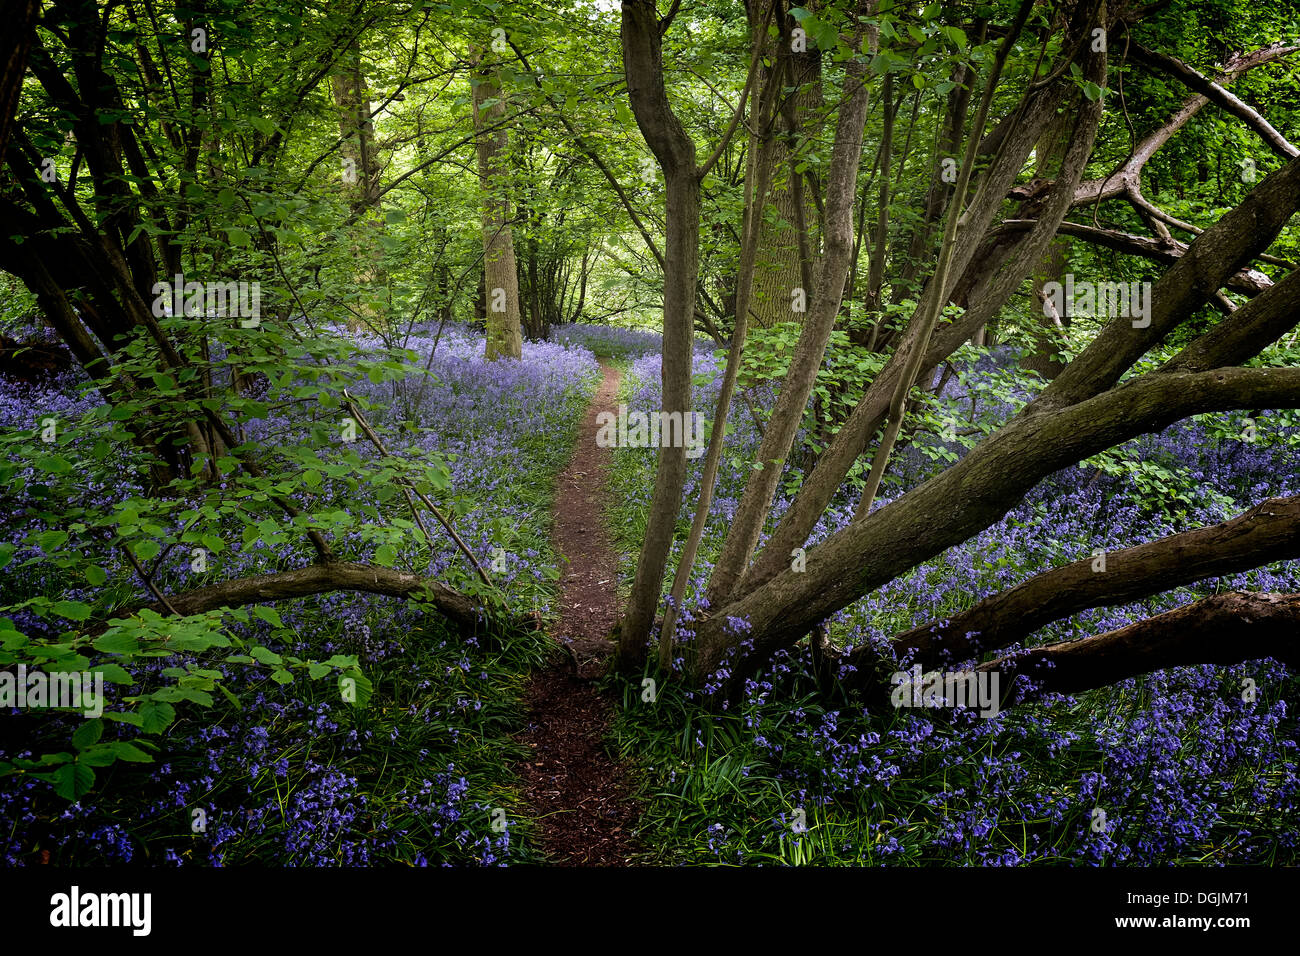 Bluebells in an Essex woodland. Stock Photo